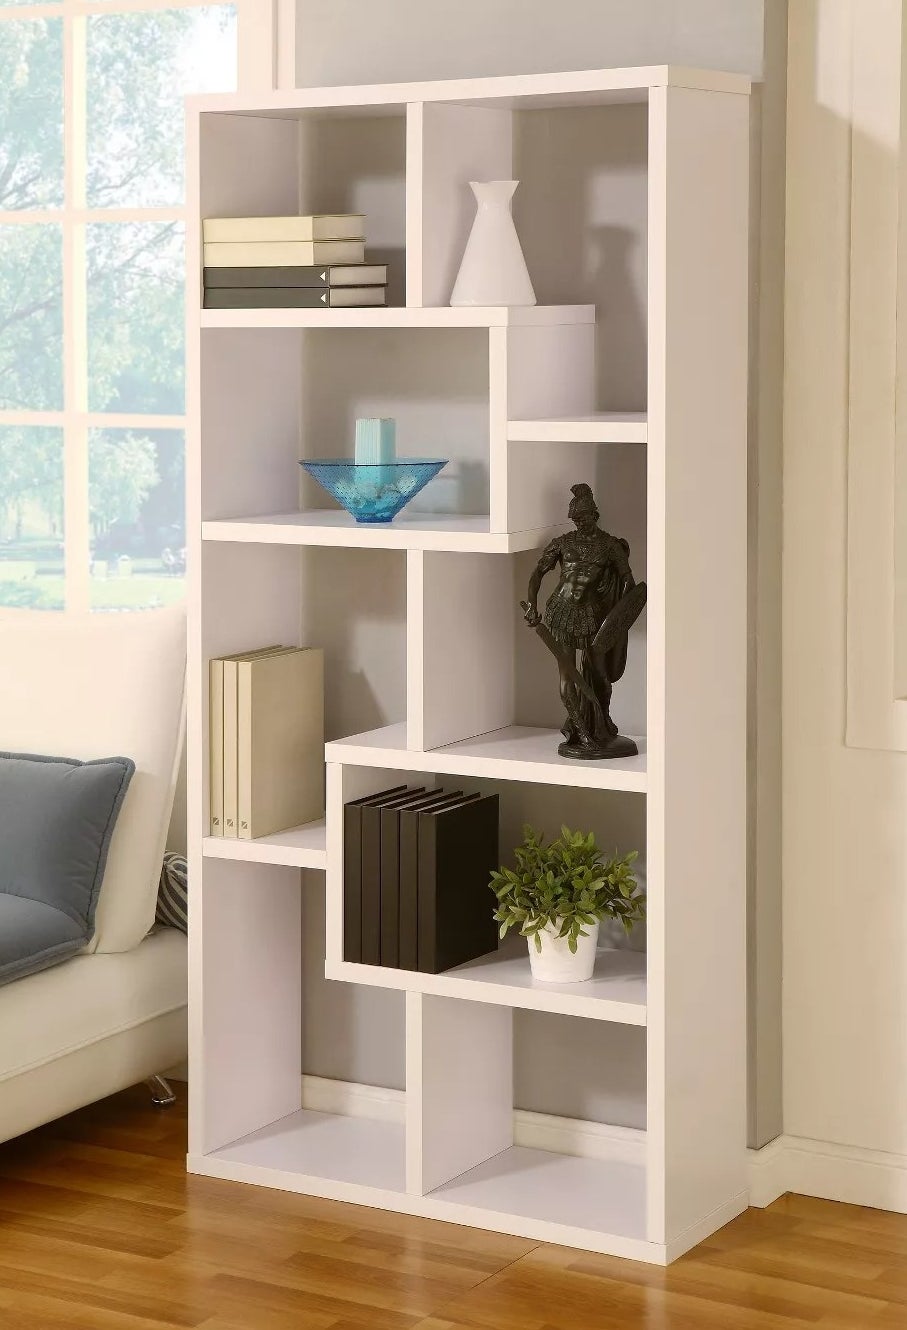 The white asymmentrical bookcase